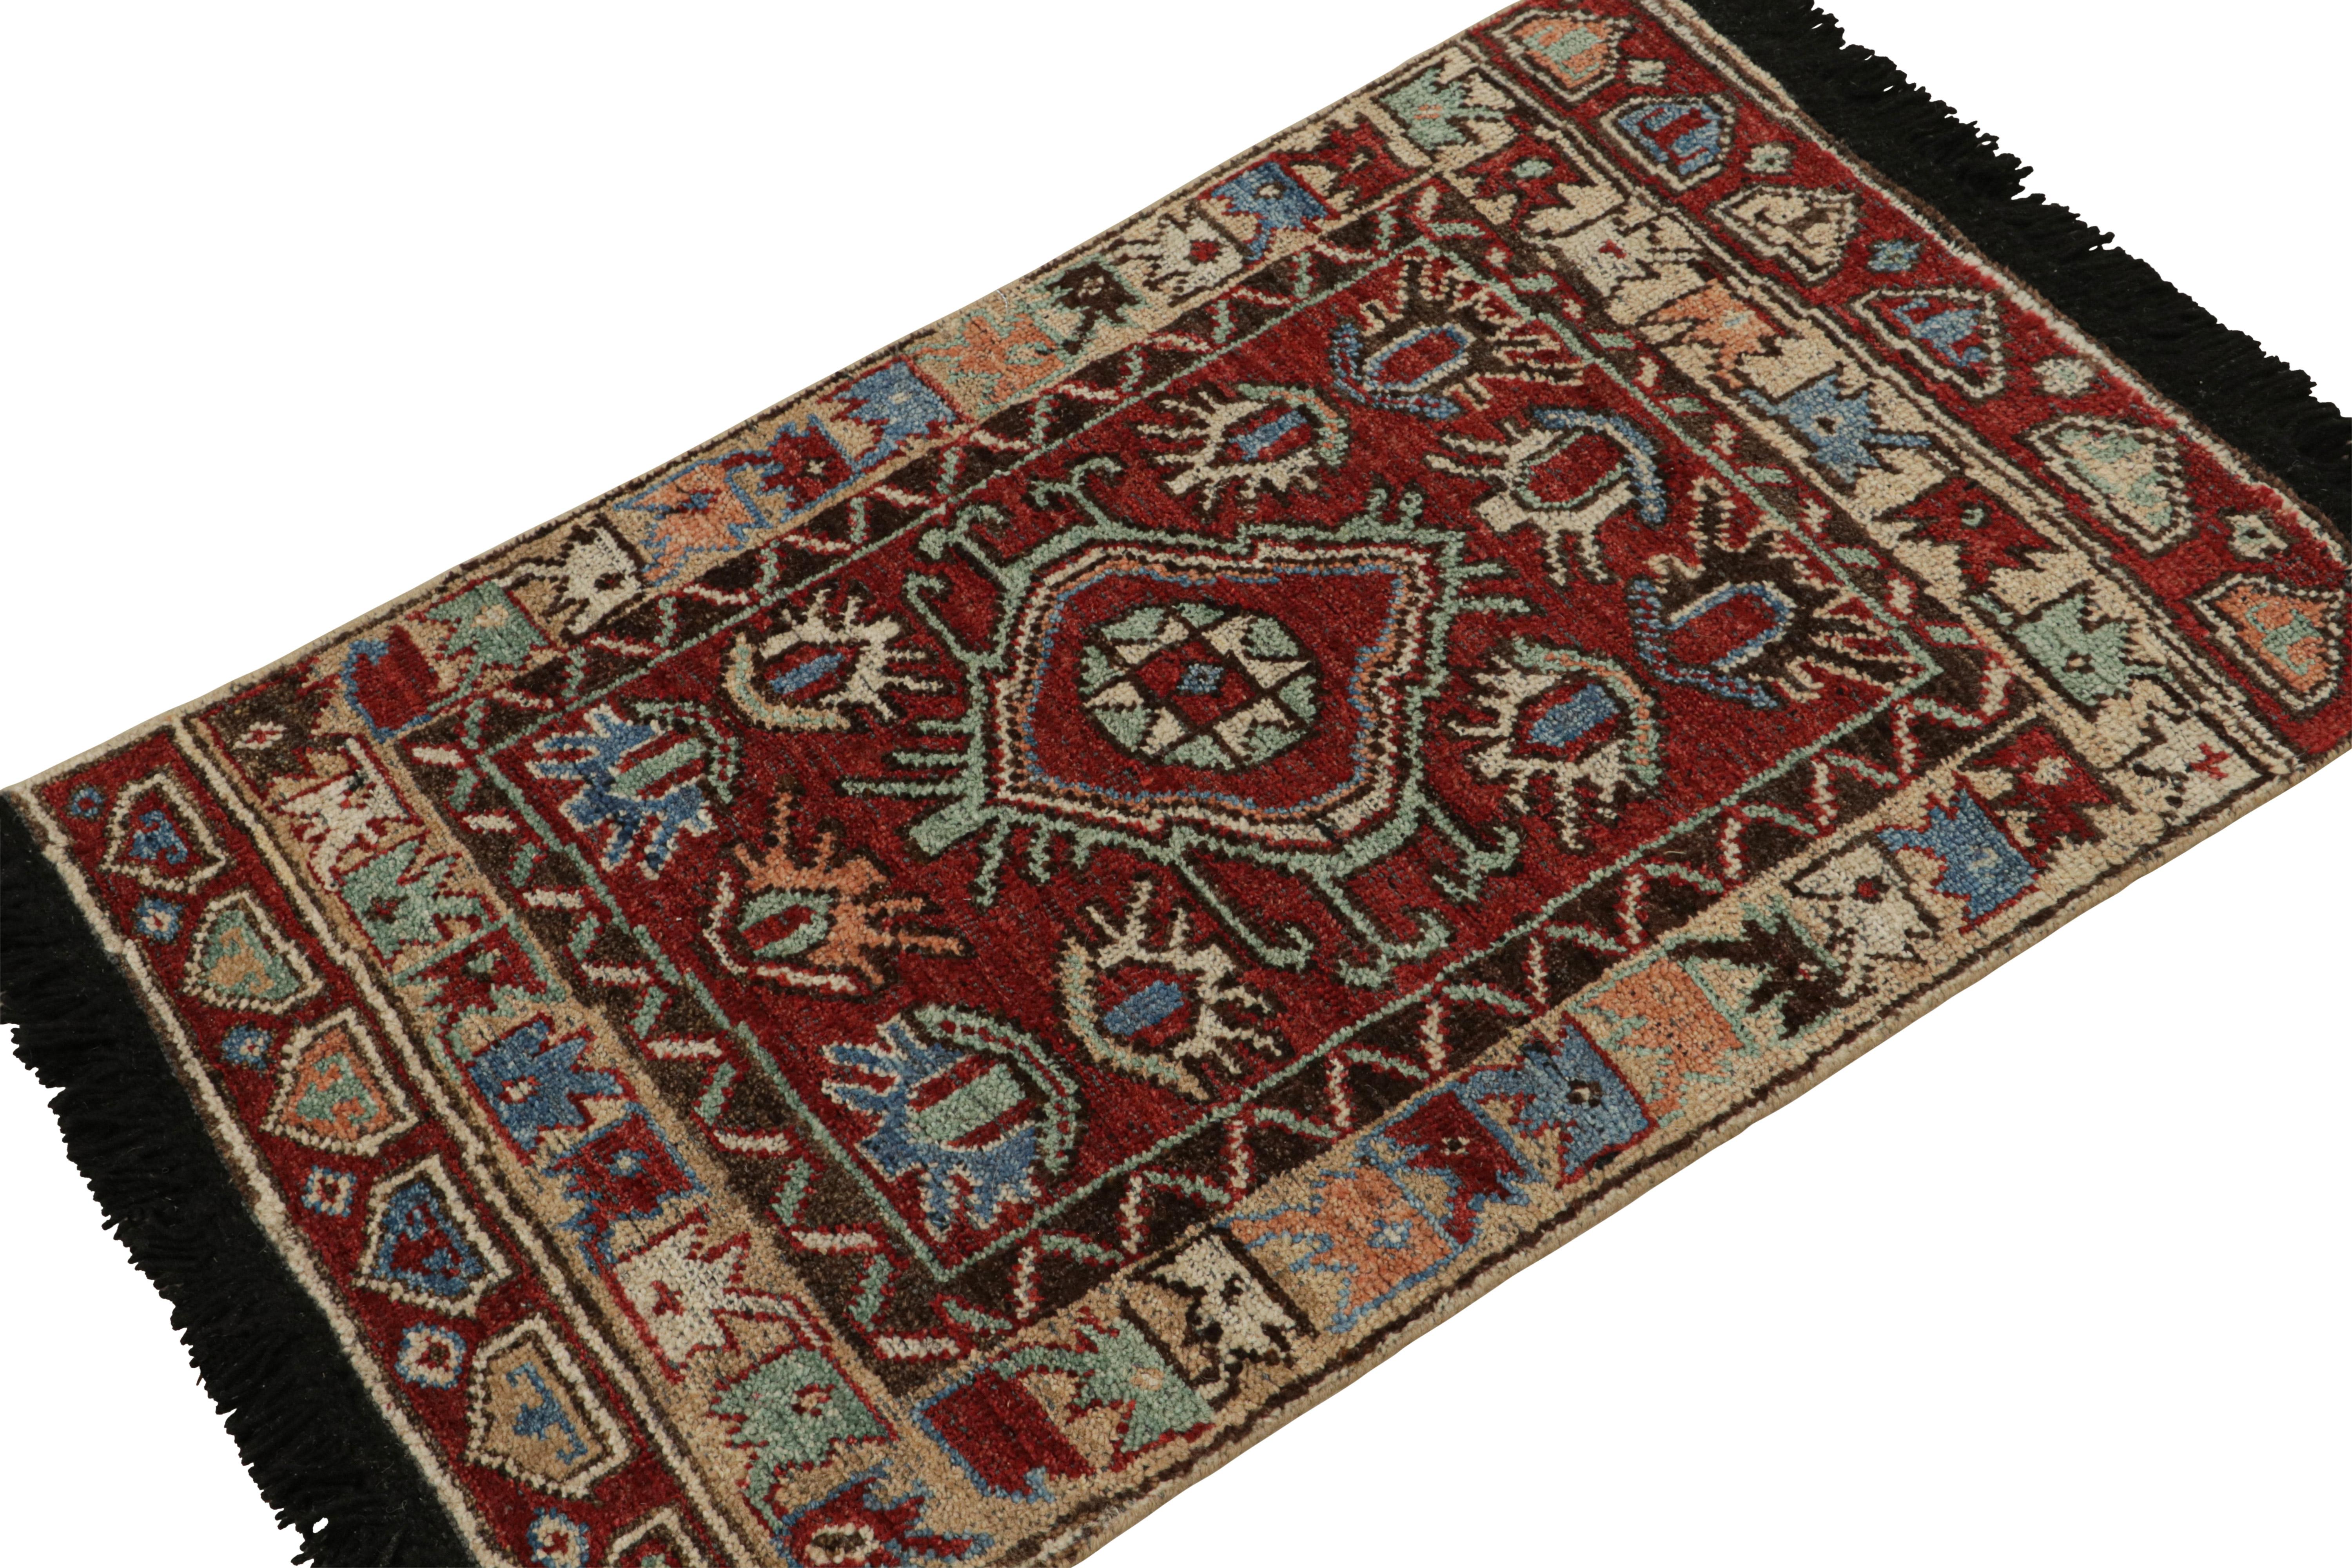 This 2x3 rug is a grand new entry to Rug & Kilim’s custom classics Burano collection. Hand-knotted in wool.

On the Design: 

This rug is inspired by antique tribal rugs & features primitivist geometric patterns in vibrant tones of red, blue, green